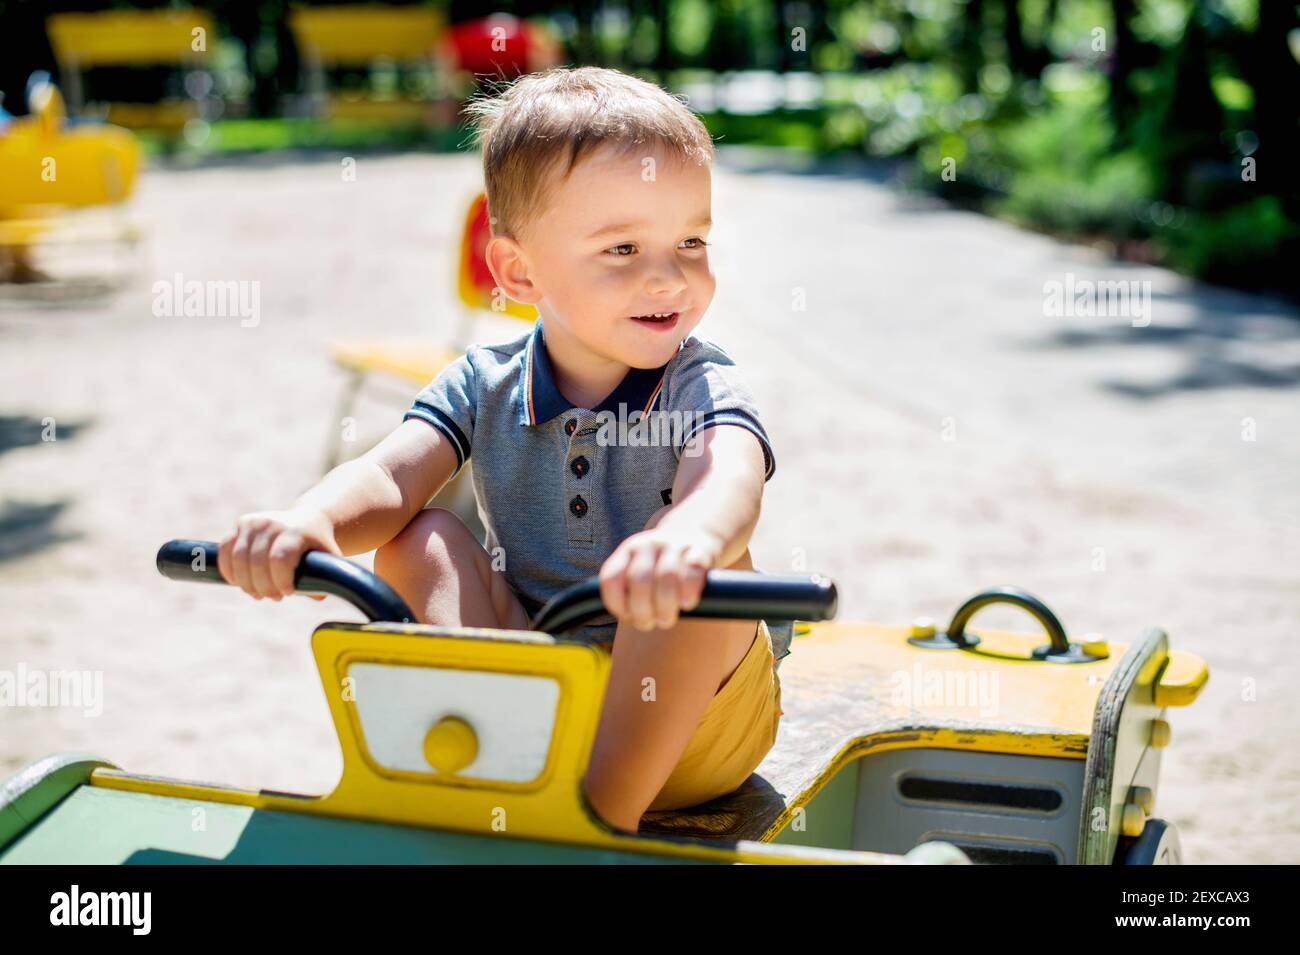 Adorable 2 years old kid riding wooden car at summer park playground Stock Photo